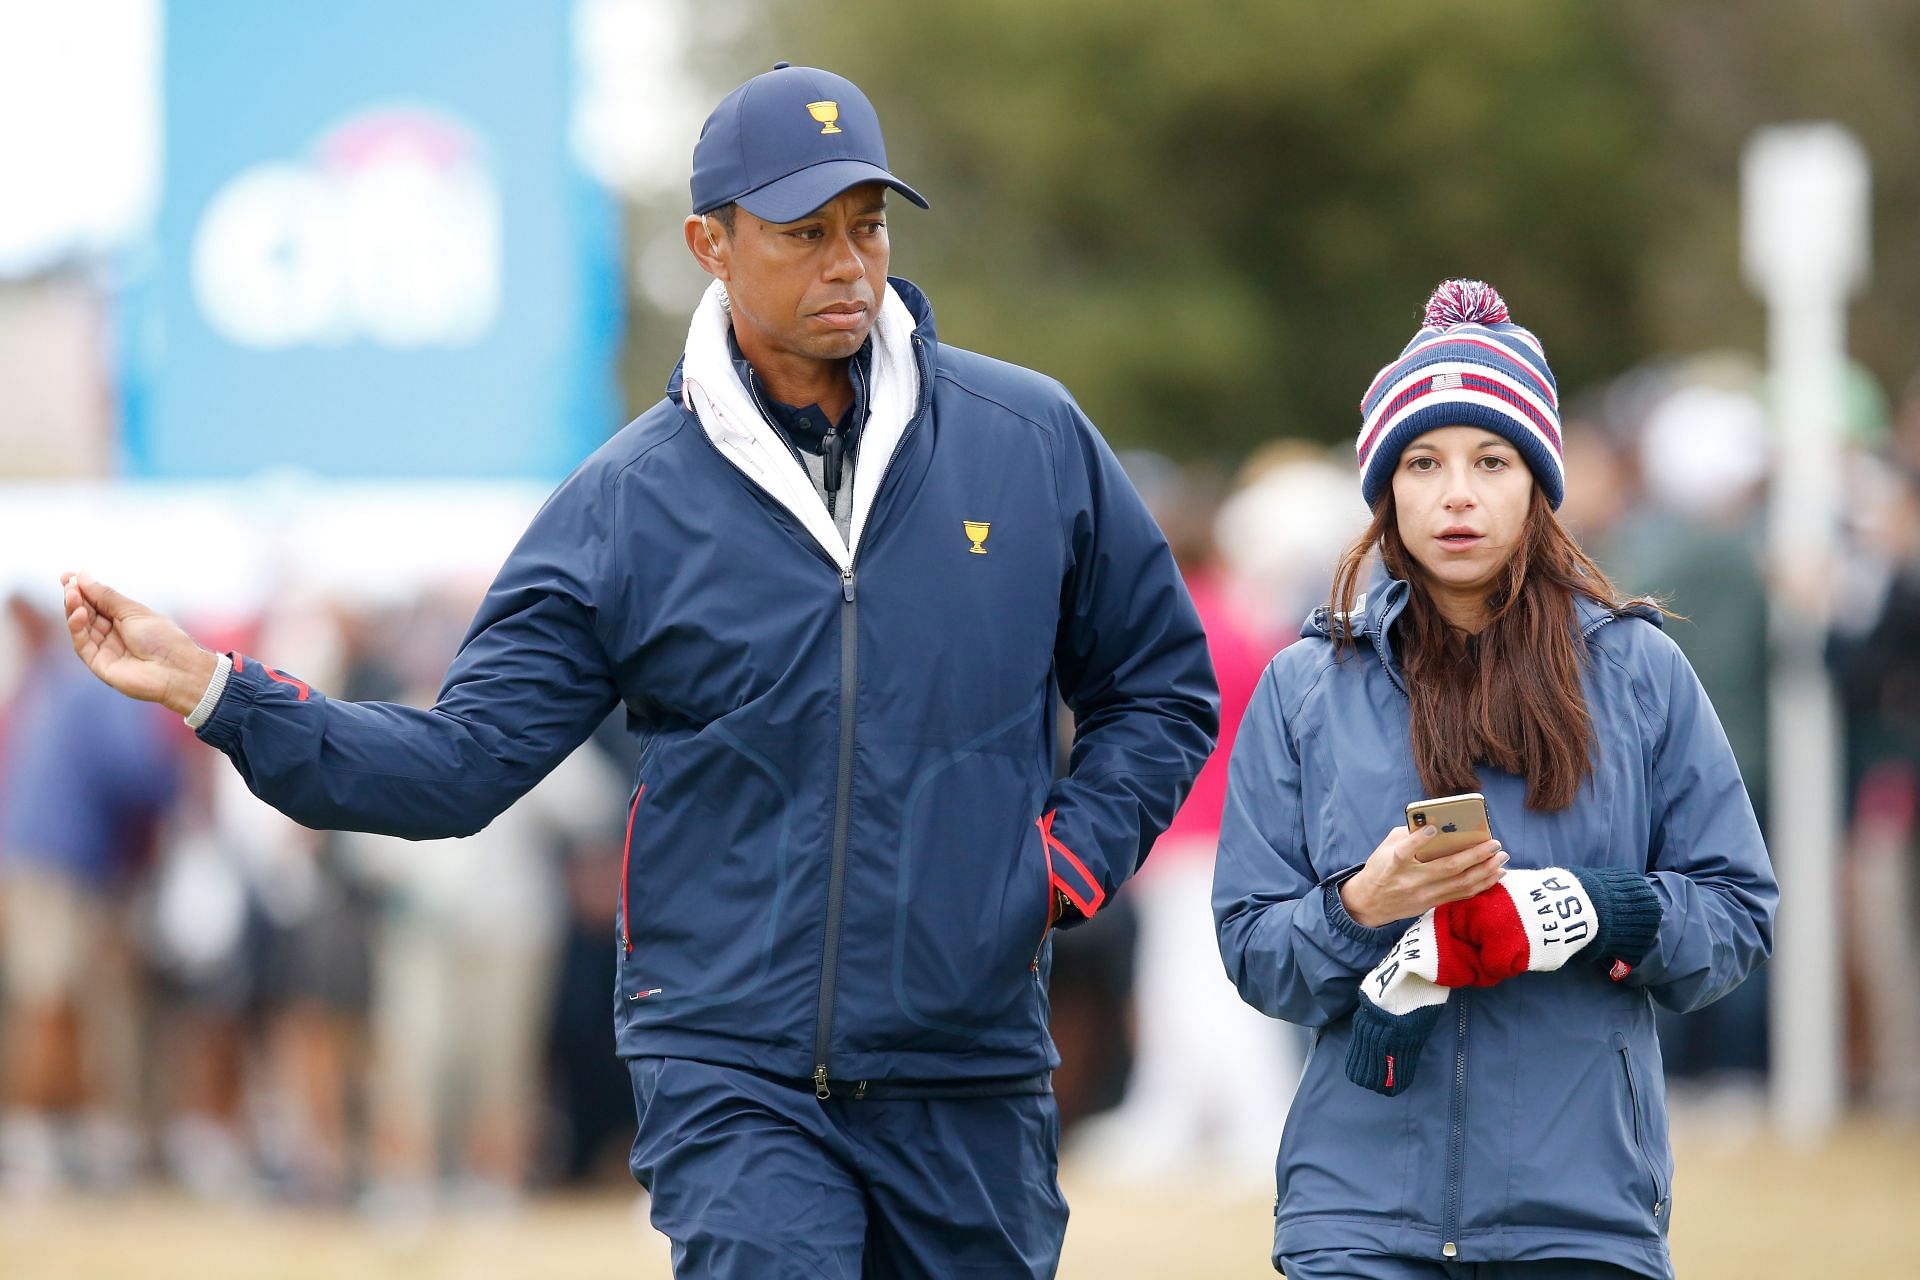 Tiger Woods and Erica Herman at the 2019 Presidents Cup - Day 3 (Image via Darrian Traynor/Getty Images)